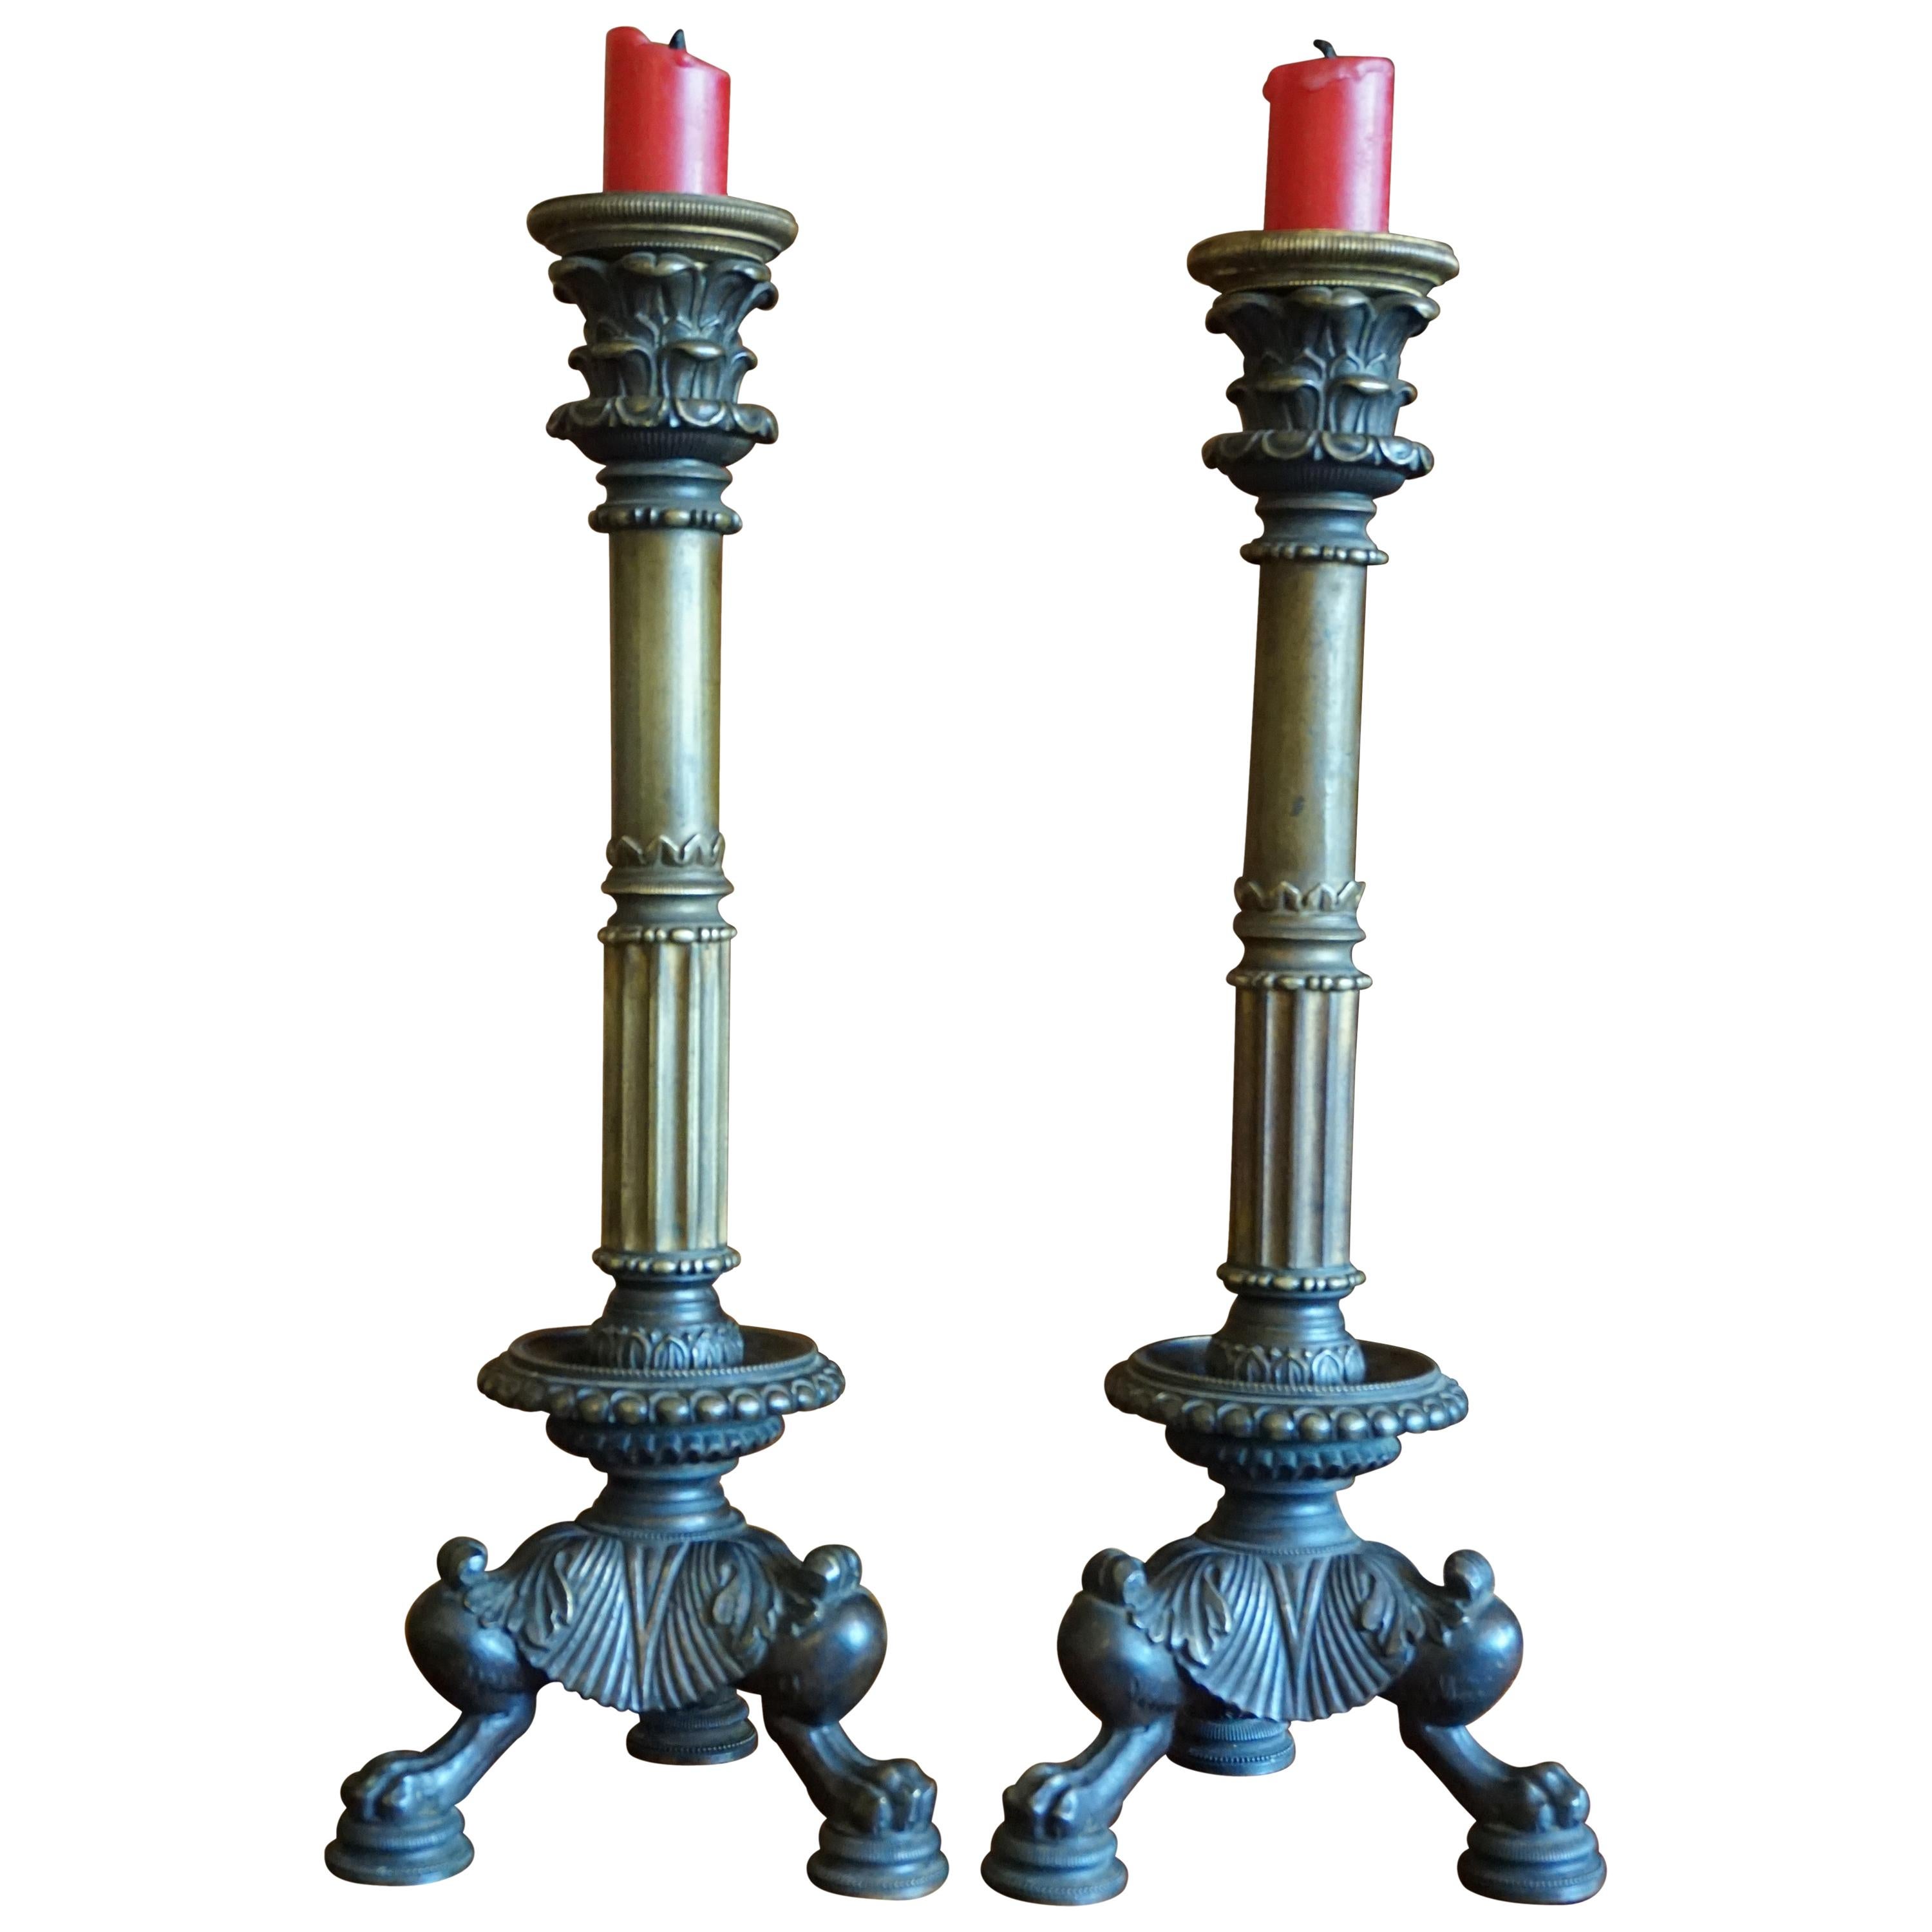 Great Pair of Antique 19th Century Bronze and Brass Empire Revival Candlesticks